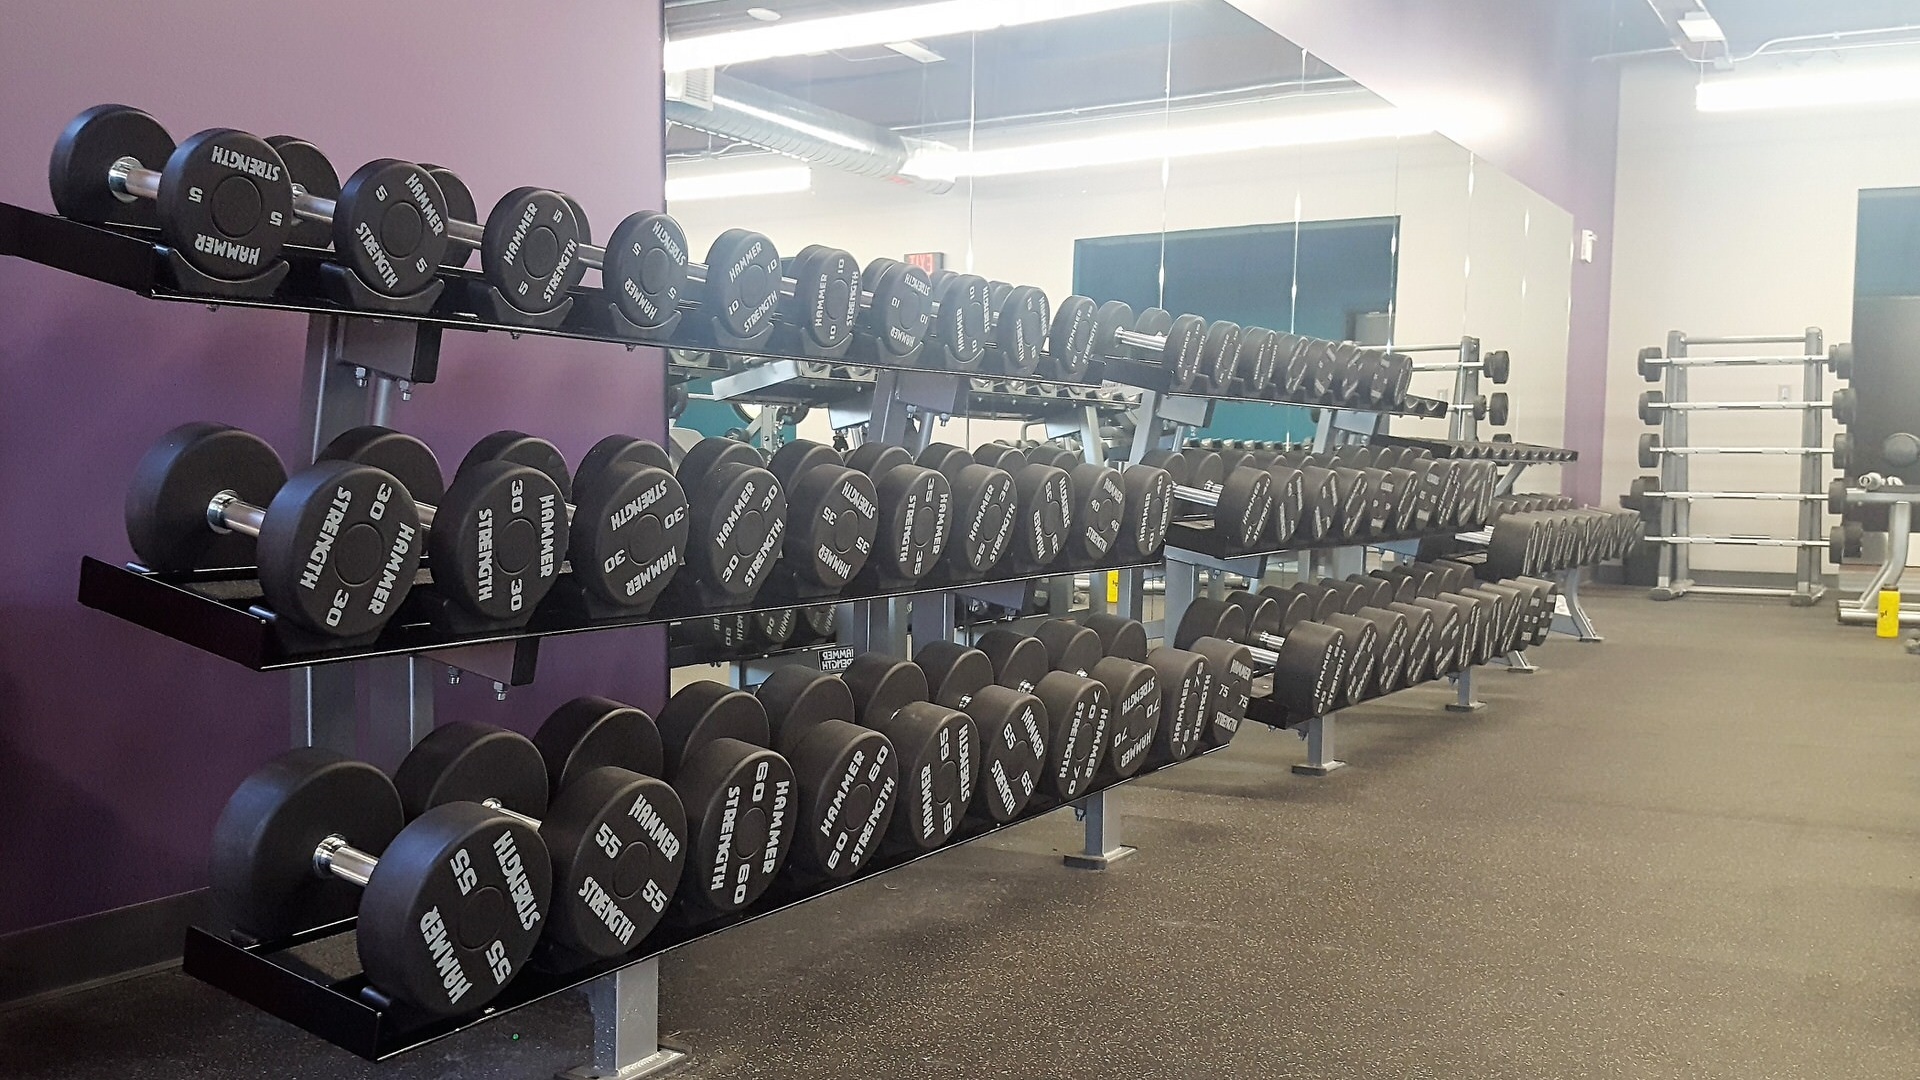 YMCA of Martha's Vineyard - The new Iron Grip dumbbells are